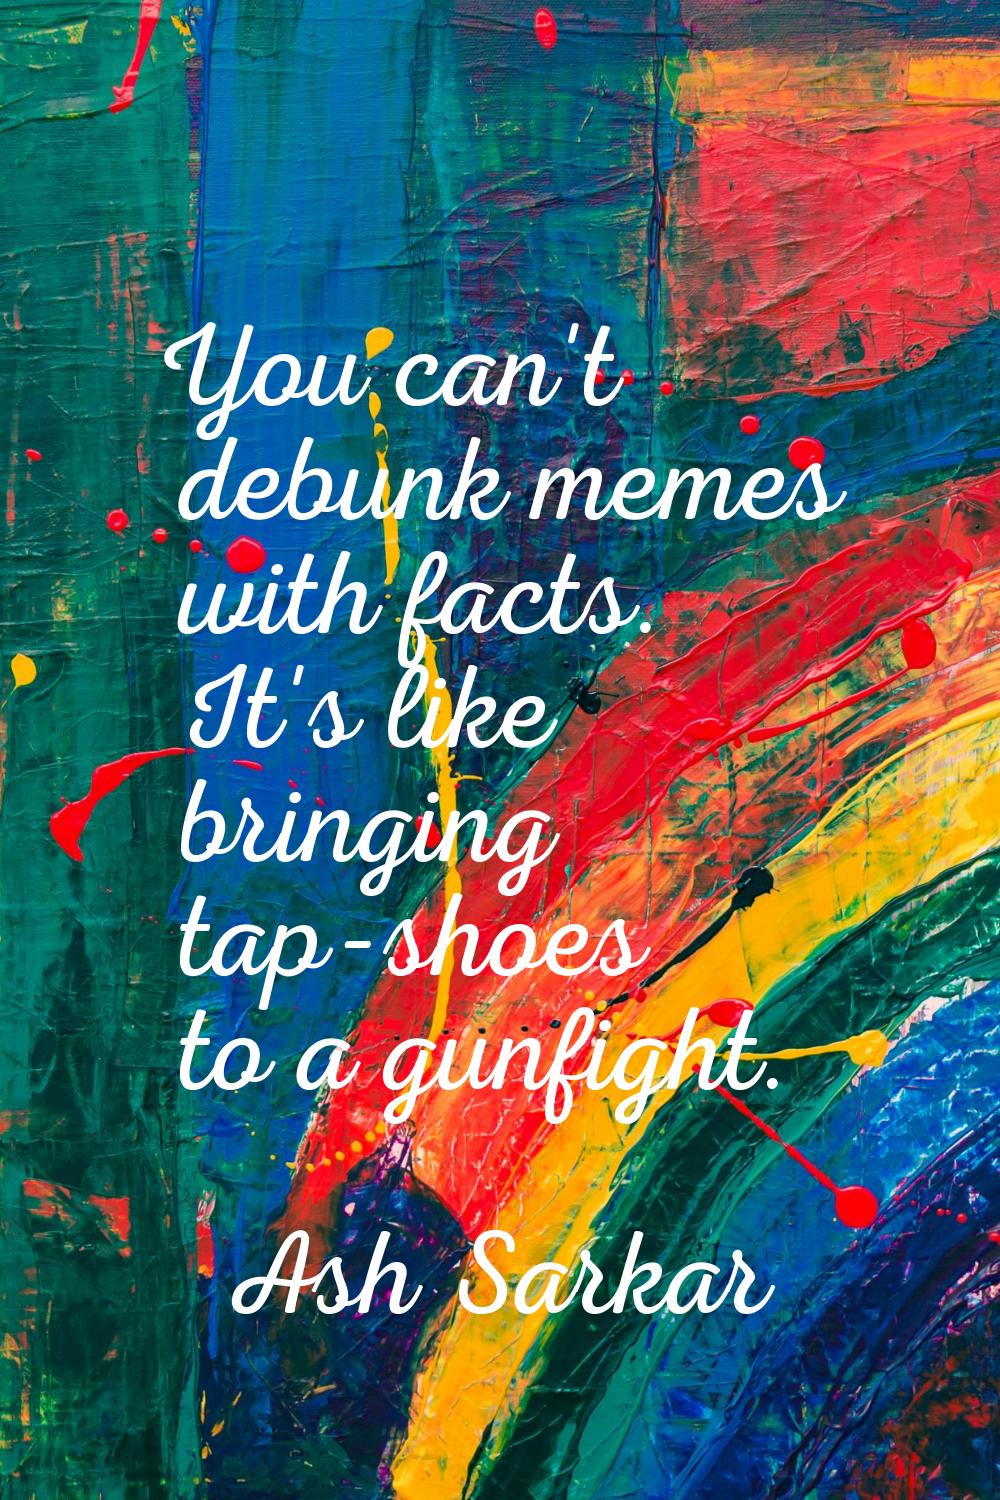 You can't debunk memes with facts. It's like bringing tap-shoes to a gunfight.